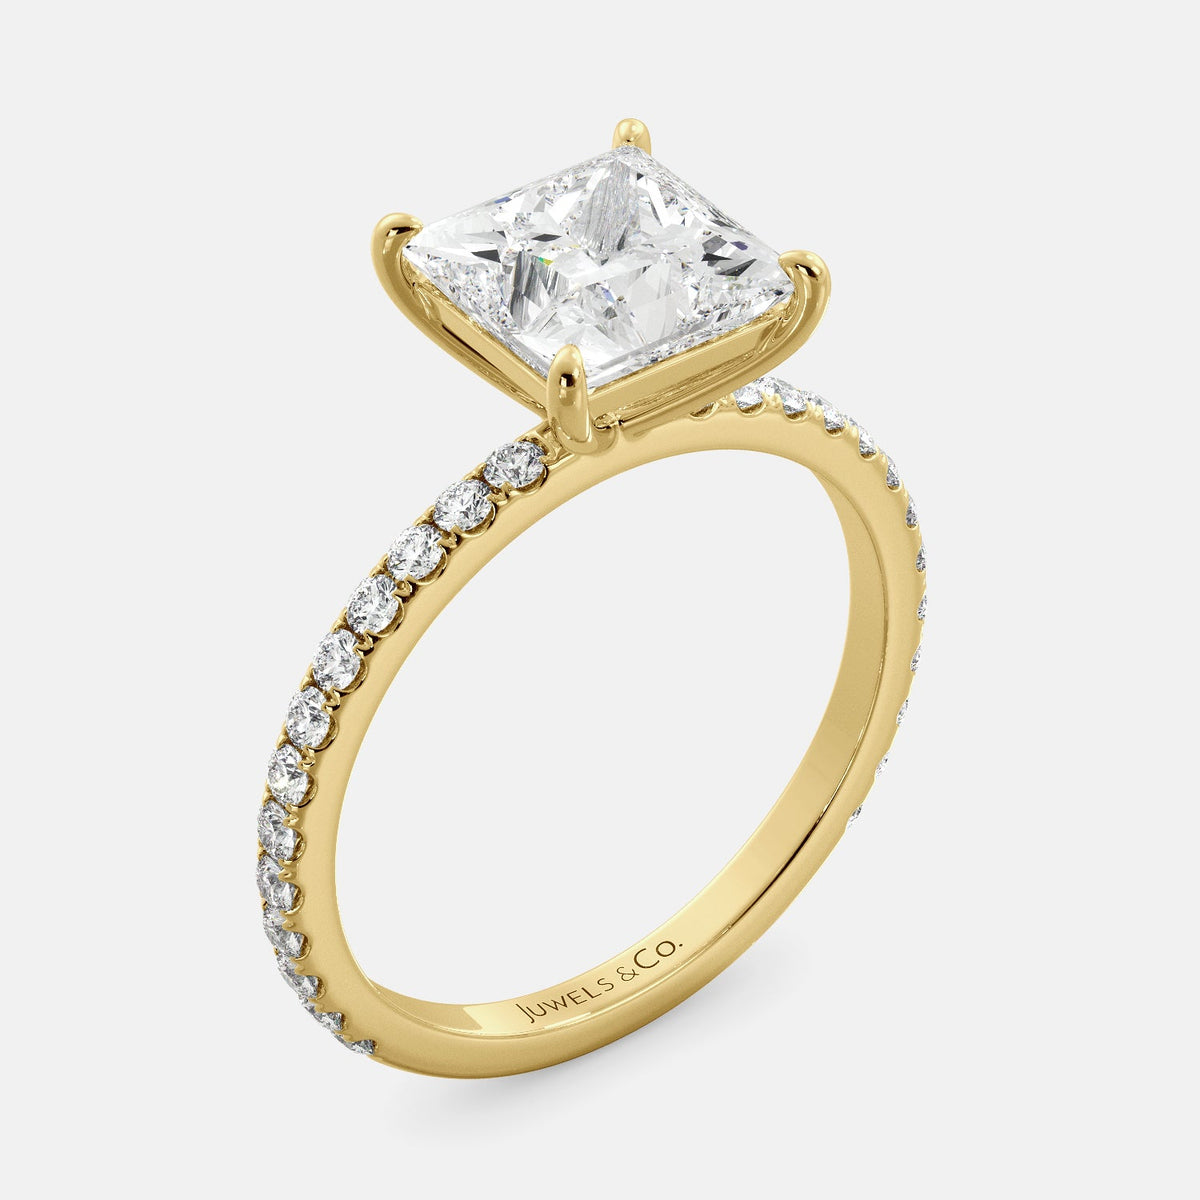 A close-up of a yellow gold cushion solitaire lab-grown diamond ring with an eternity band. The lab-grown diamond is a climate -positive diamond, created by using carbon from the atmosphere. The ring is set with a 1-carat cushion-cut diamond in the center, surrounded by a row of smaller diamonds on the band. The ring is available in a variety of sizes and starts at \\$6,400.00.